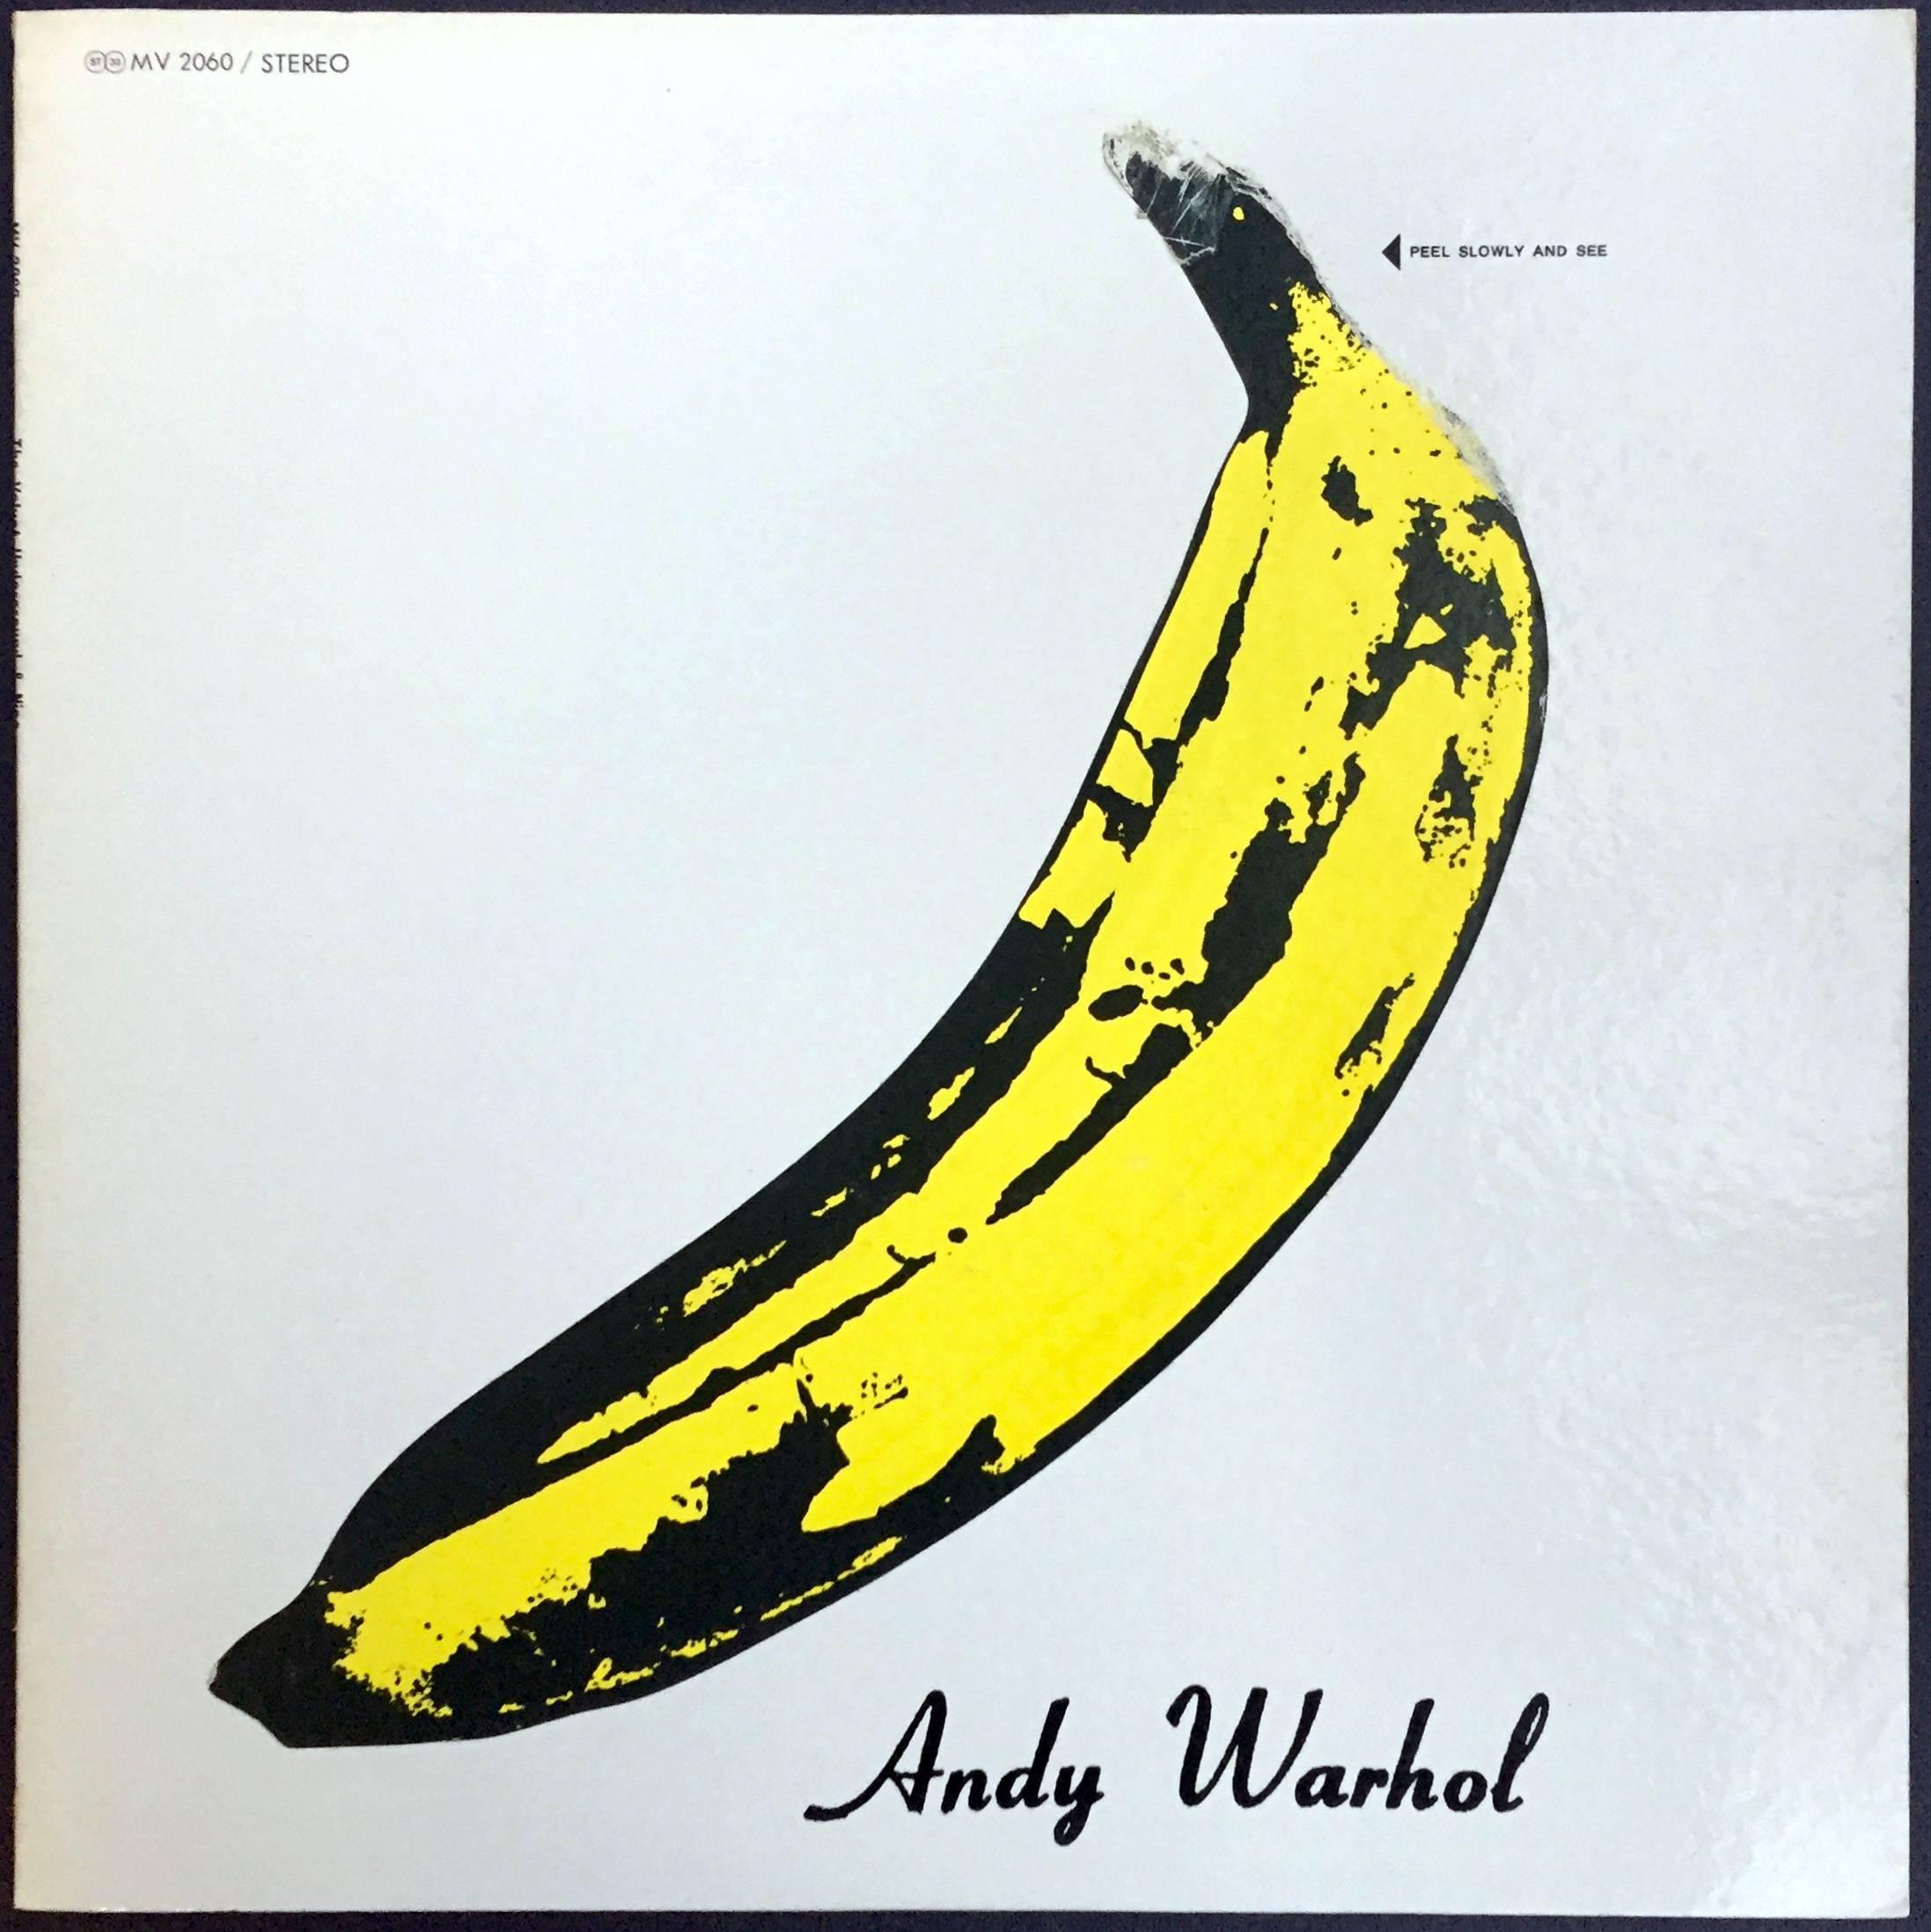  Warhol Banana Cover (Un-peeled), Nico & The Velvet Underground Vinyl Record - Art by Andy Warhol